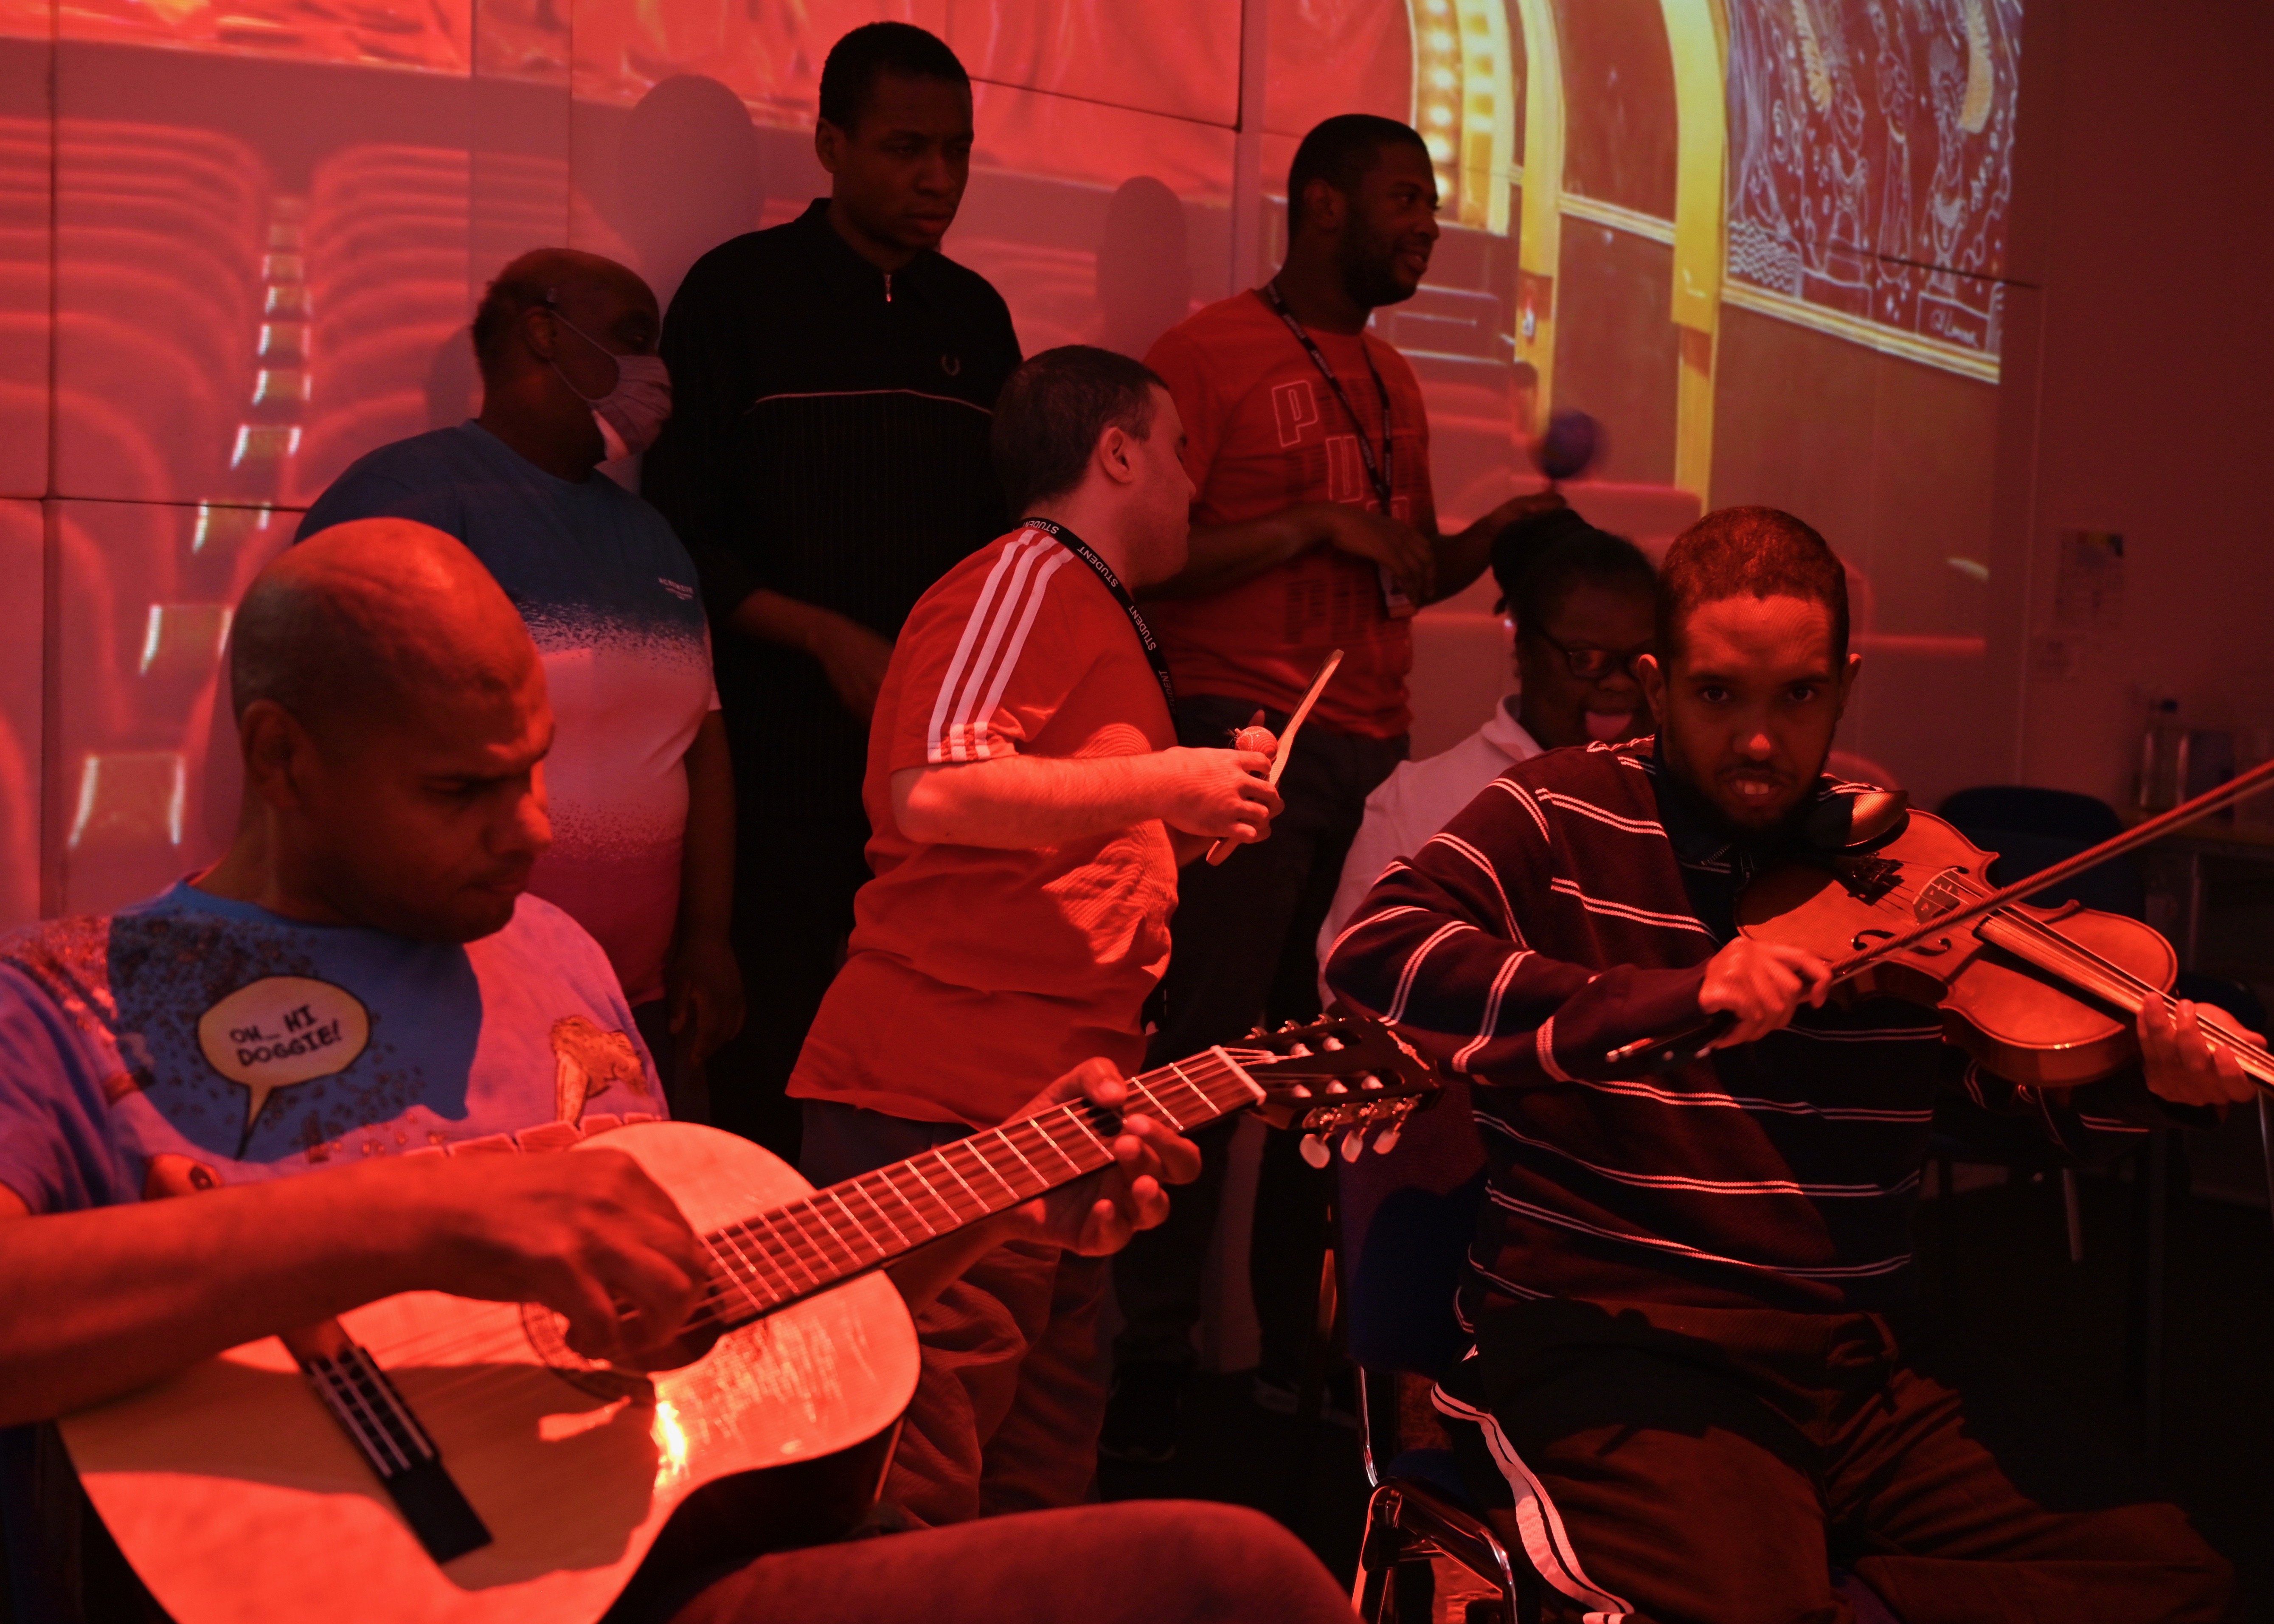 a group of musicians attending a session at Share Community play a mix of instruments including guitar and violin, seated and standing in a room covered in red light, the group are in a room with 4D audio visual equipment that projects coloured light